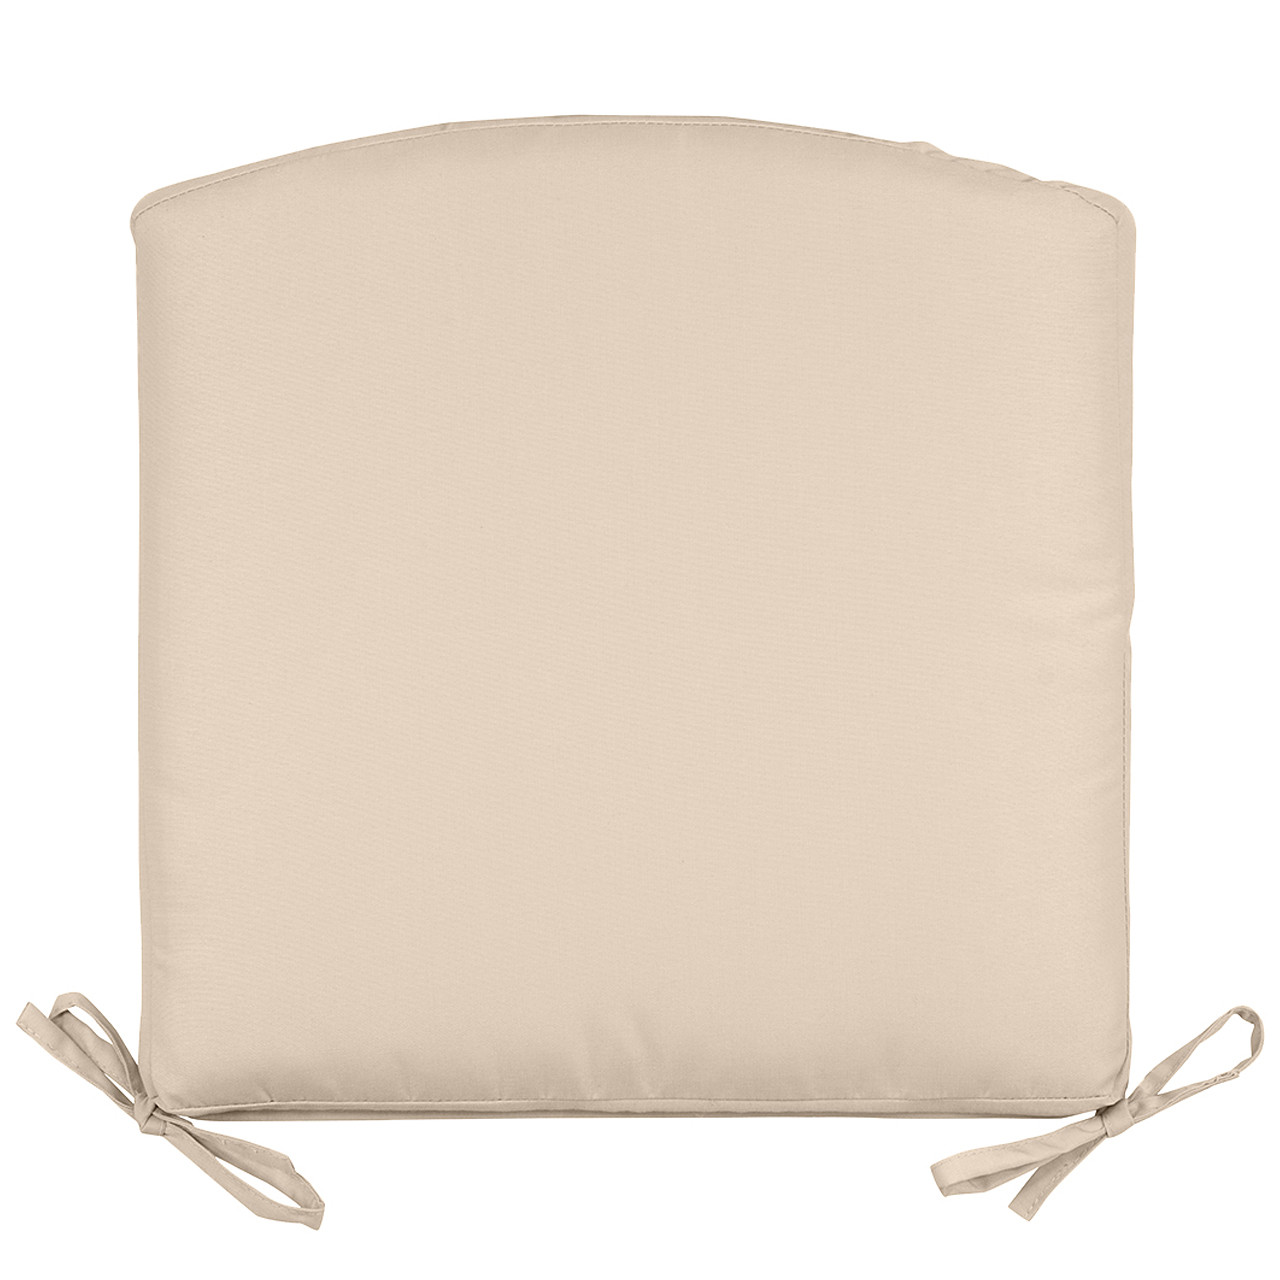 https://cdn11.bigcommerce.com/s-mm9ficts64/images/stencil/1280x1280/products/53724/136250/beige-20x20-polyester-beige-seat-cushion-3528183-1__71137.1702700883.jpg?c=1&imbypass=on